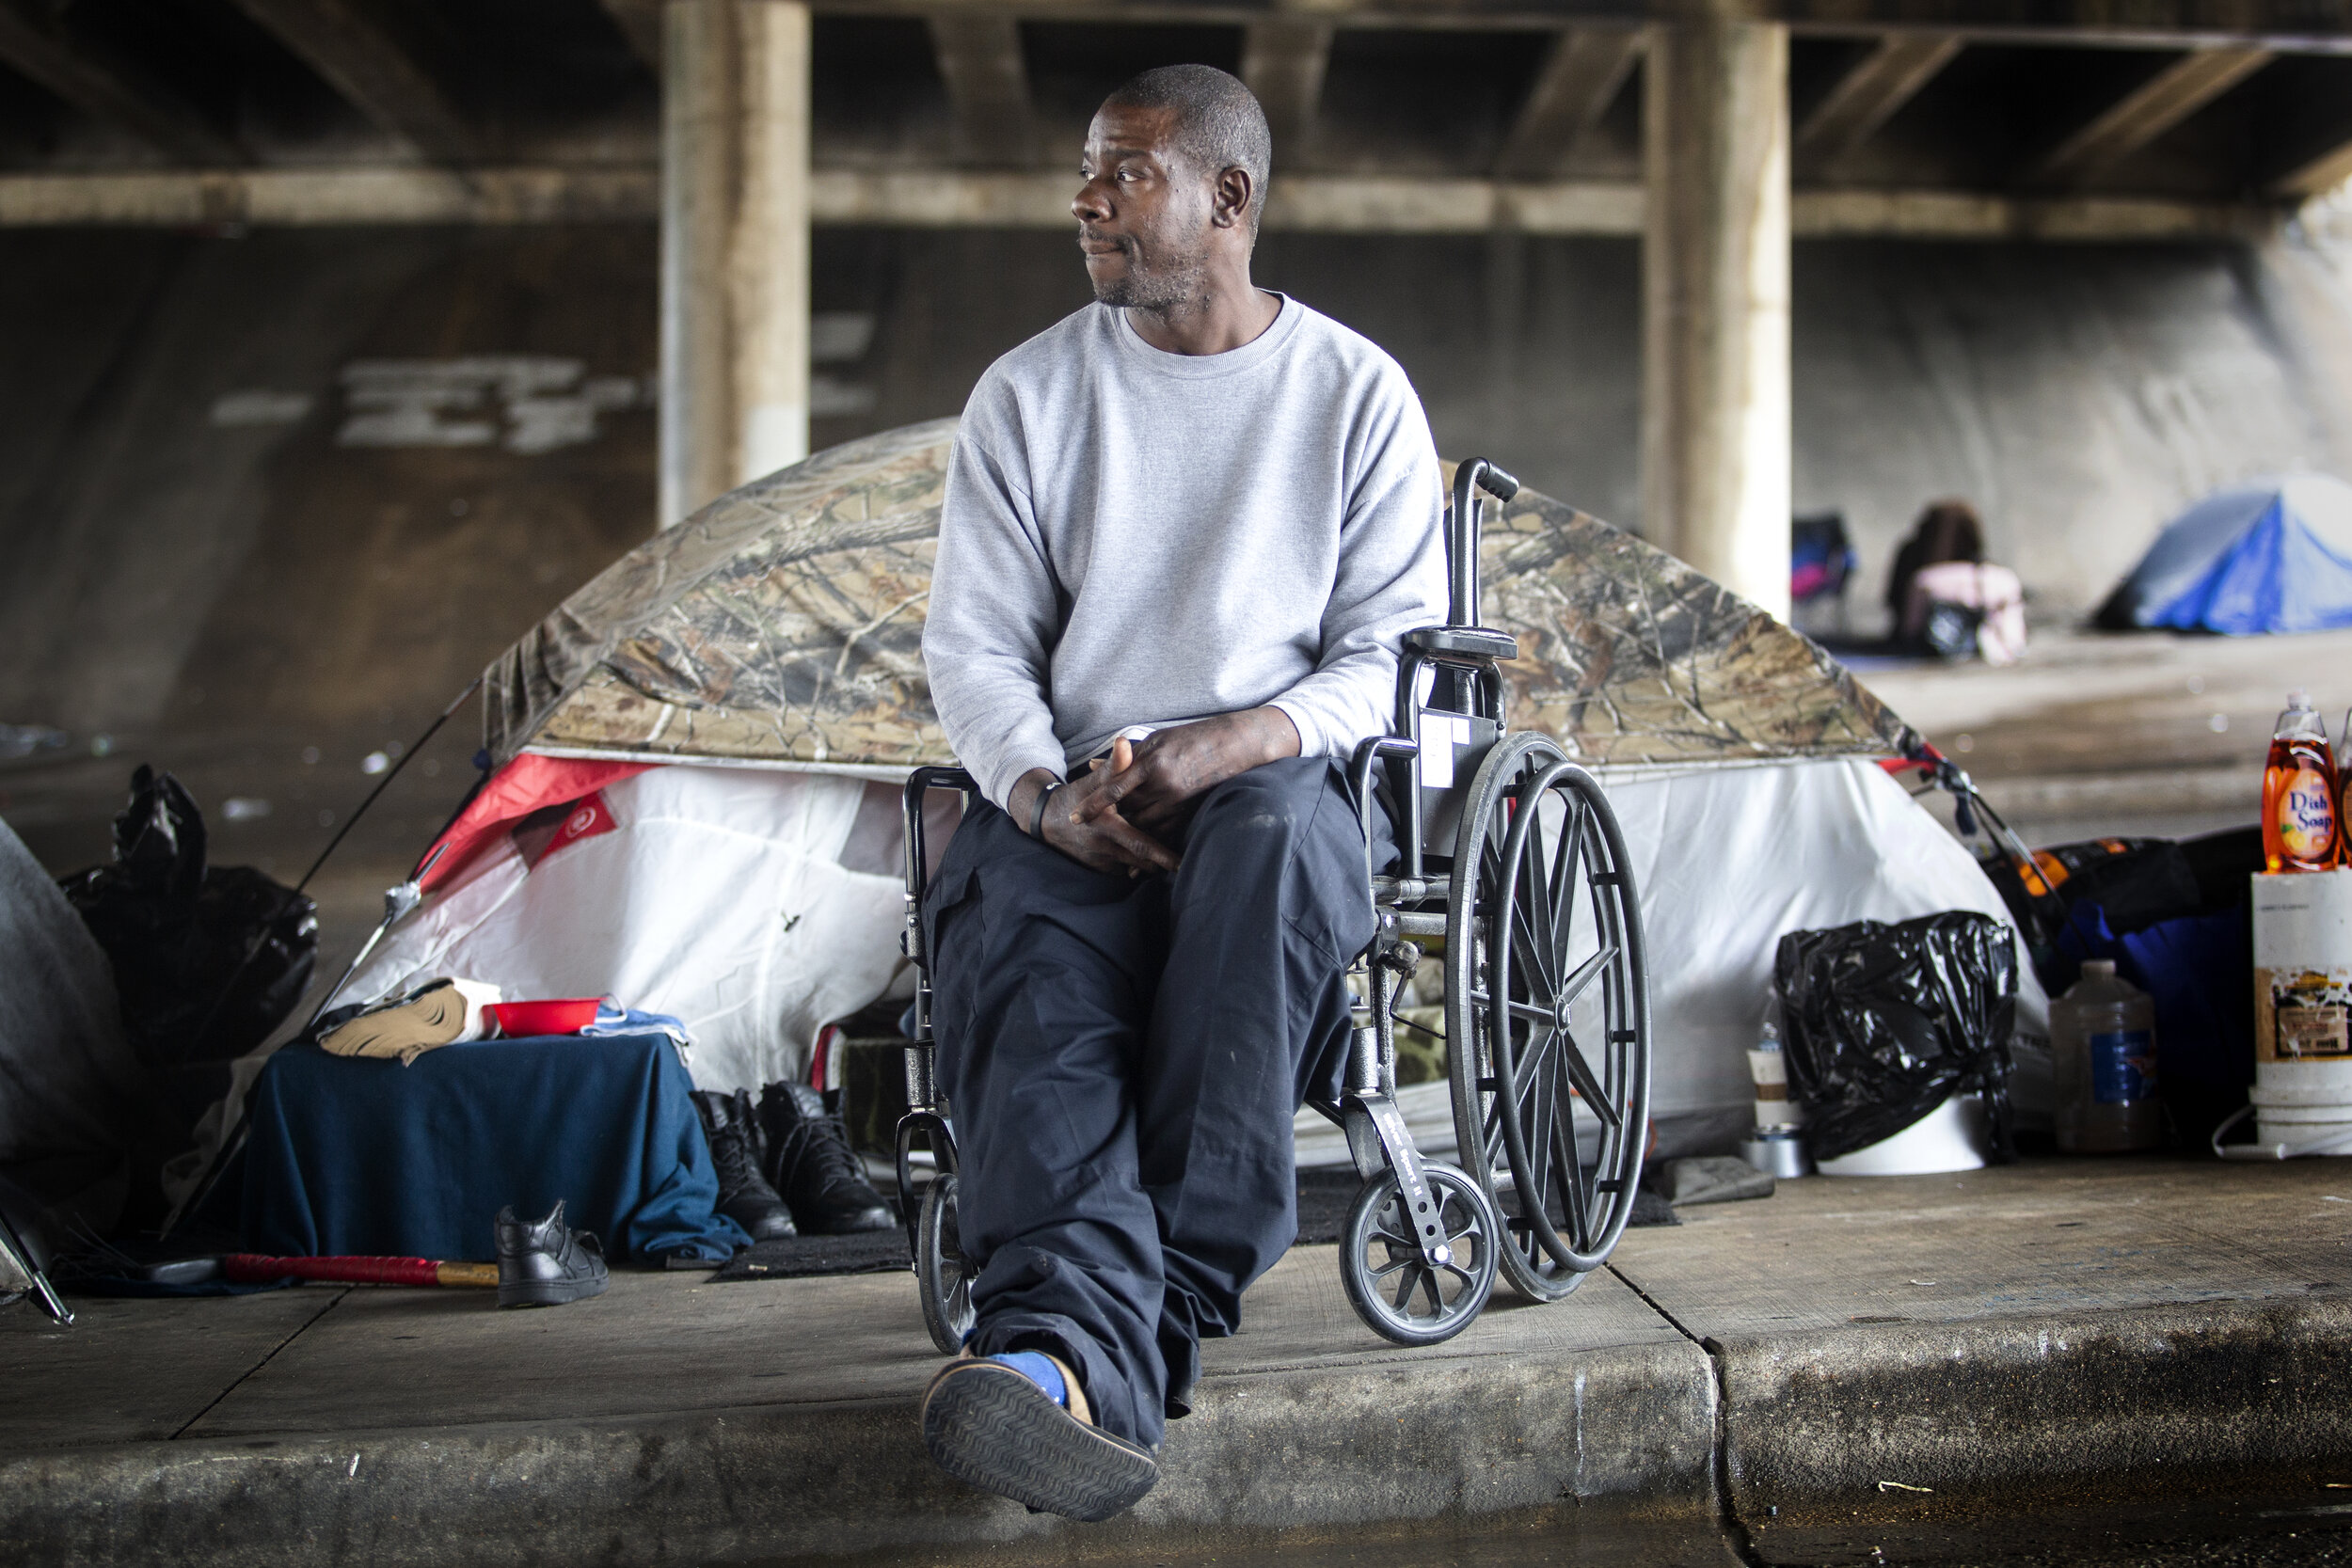  AUSTIN, TX. James Demond Pettway lives under the I-35 bridge. He and others experiencing homelessness are lacking shelters and resources during the coronavirus pandemic. 